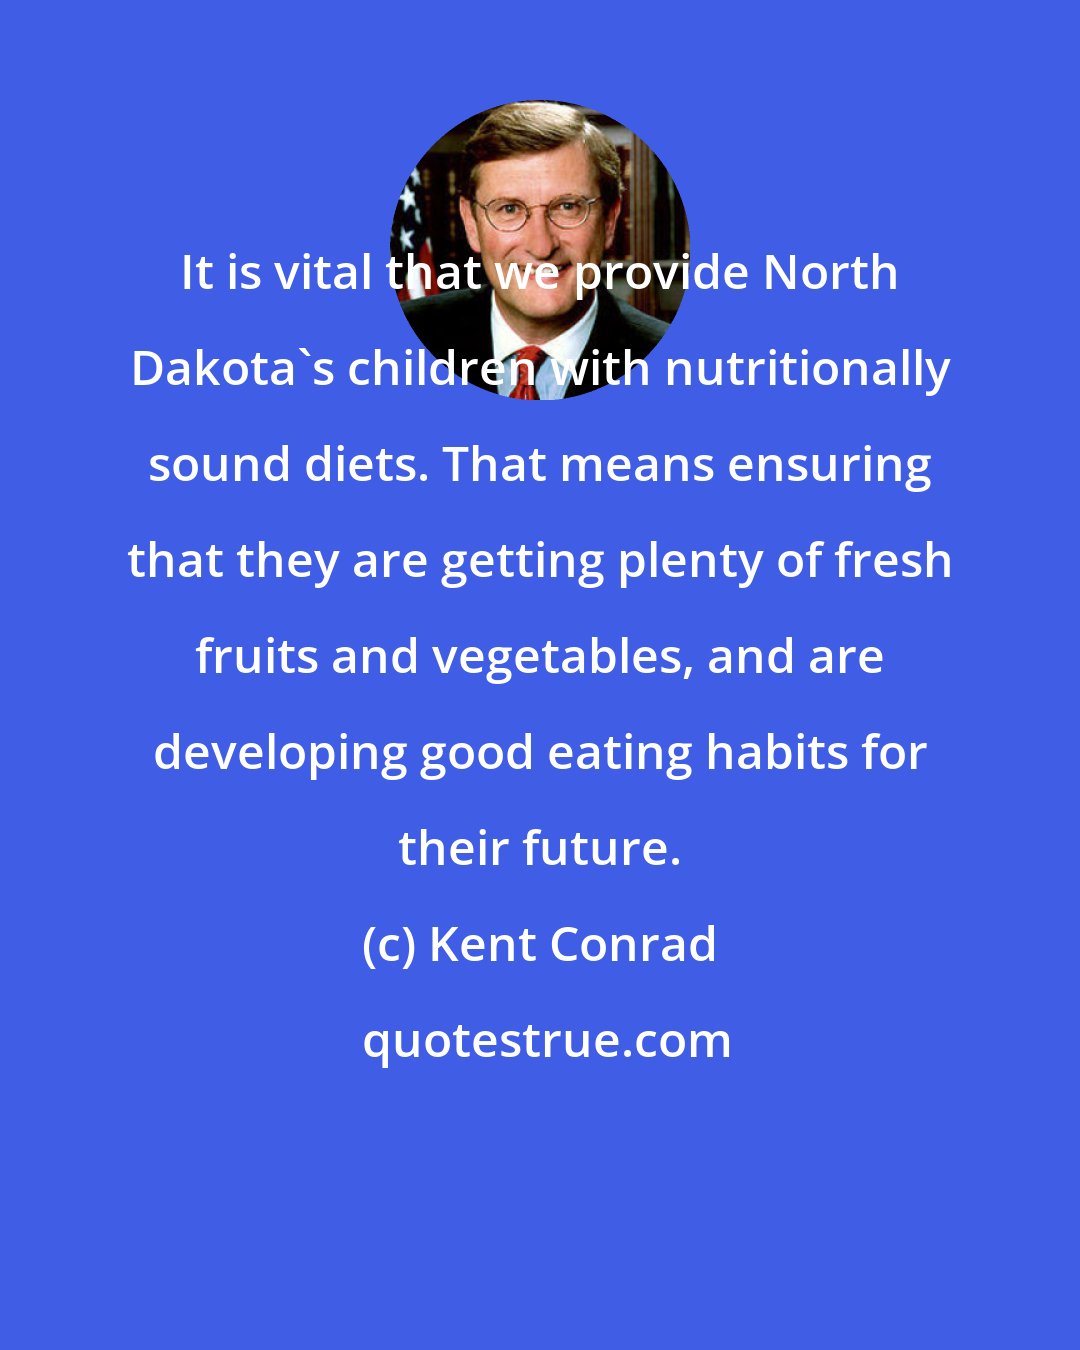 Kent Conrad: It is vital that we provide North Dakota's children with nutritionally sound diets. That means ensuring that they are getting plenty of fresh fruits and vegetables, and are developing good eating habits for their future.